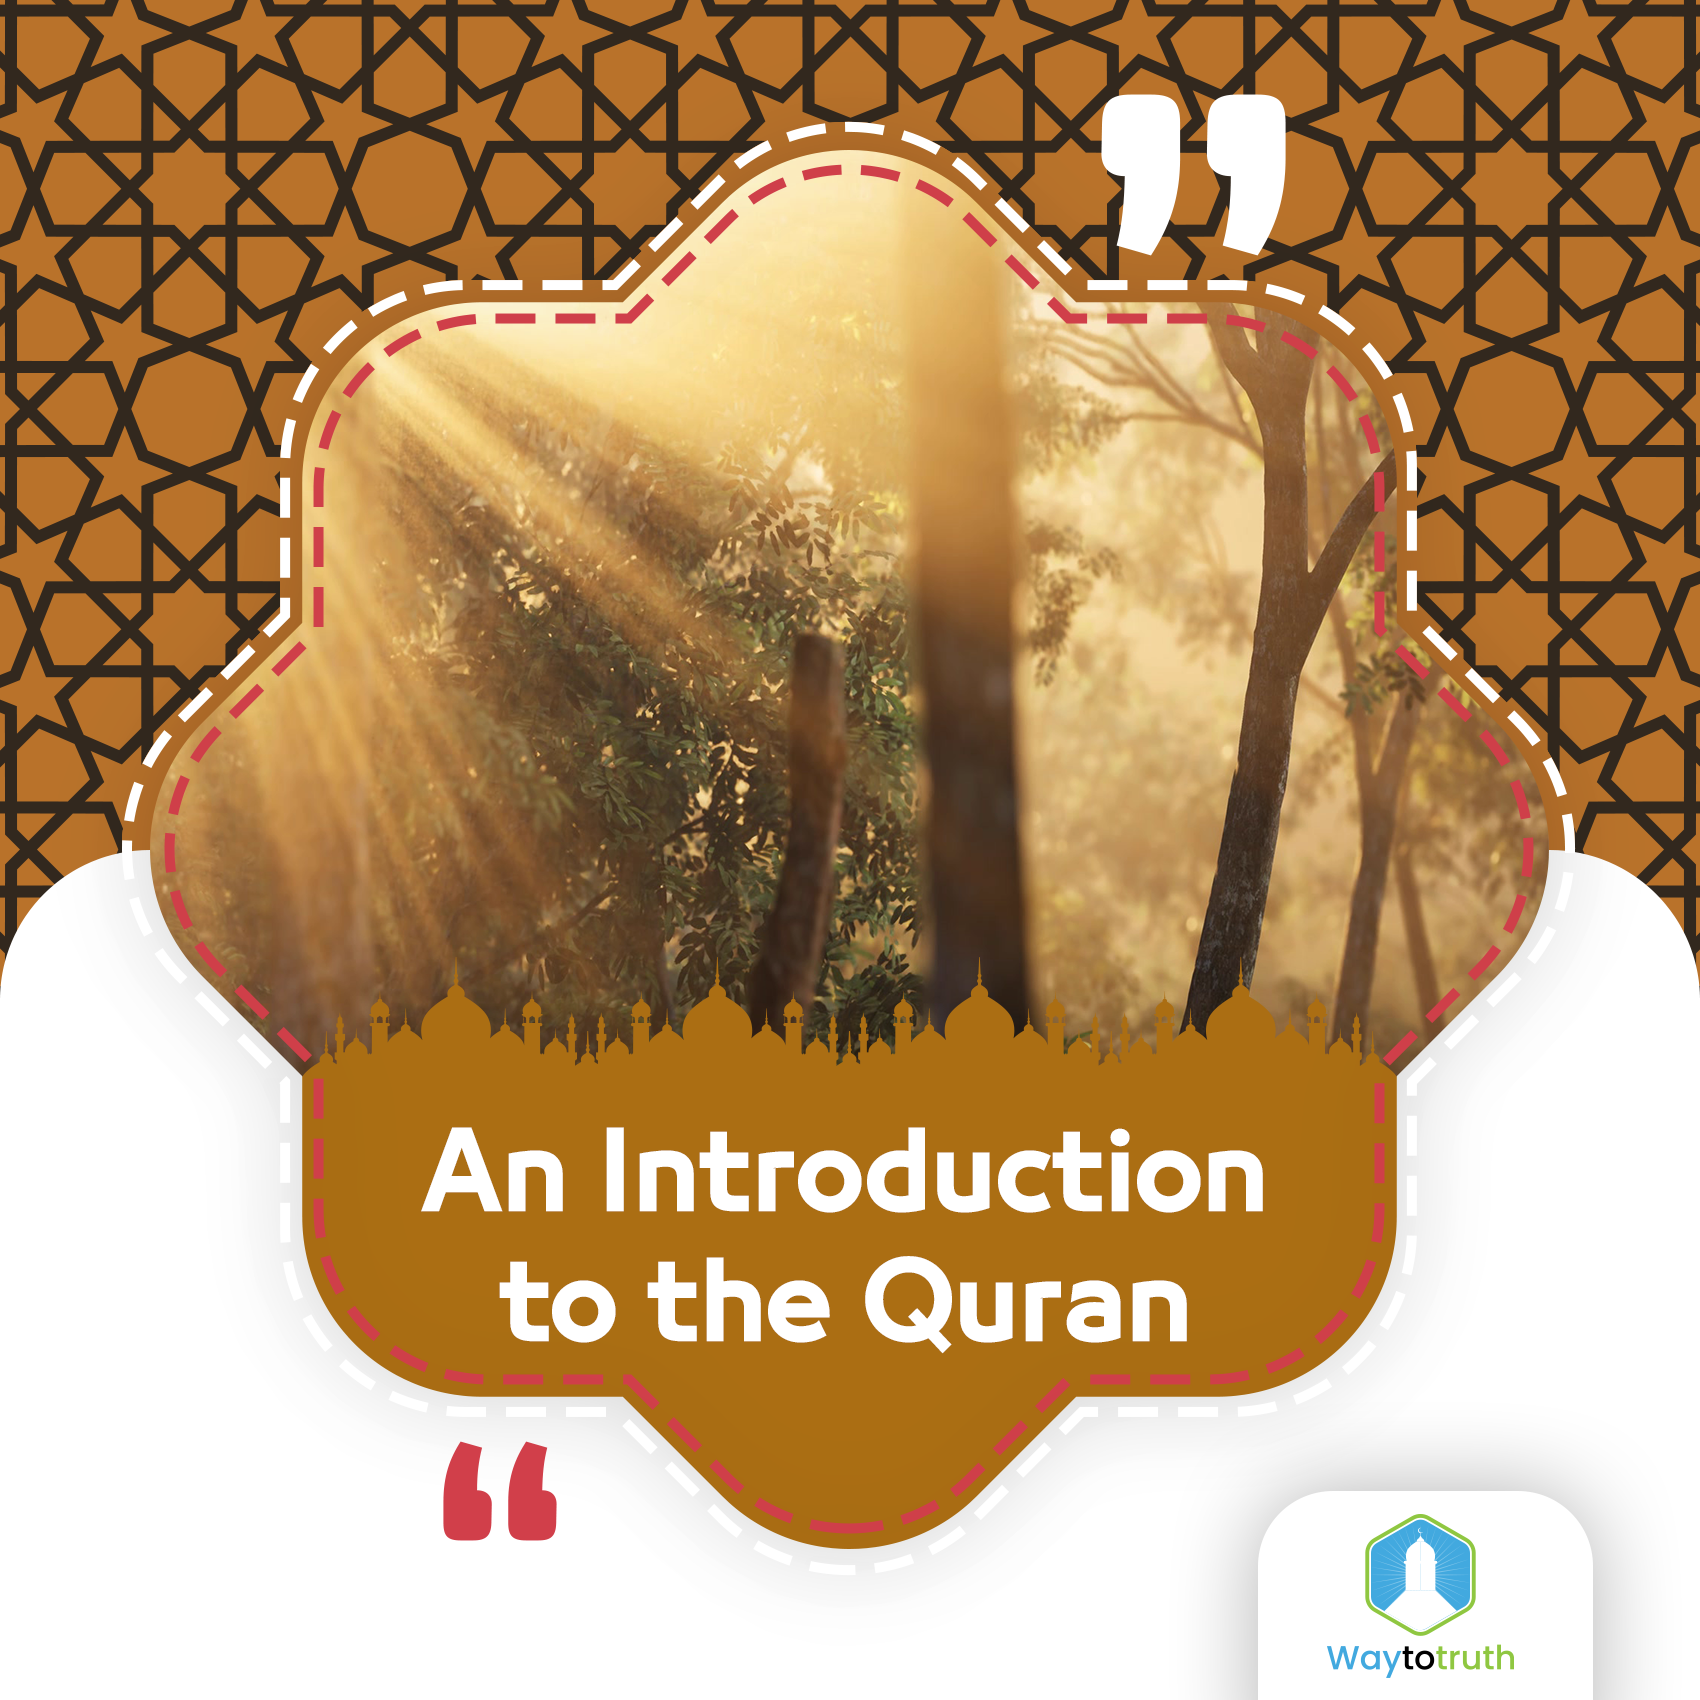 An Introduction to the Quran